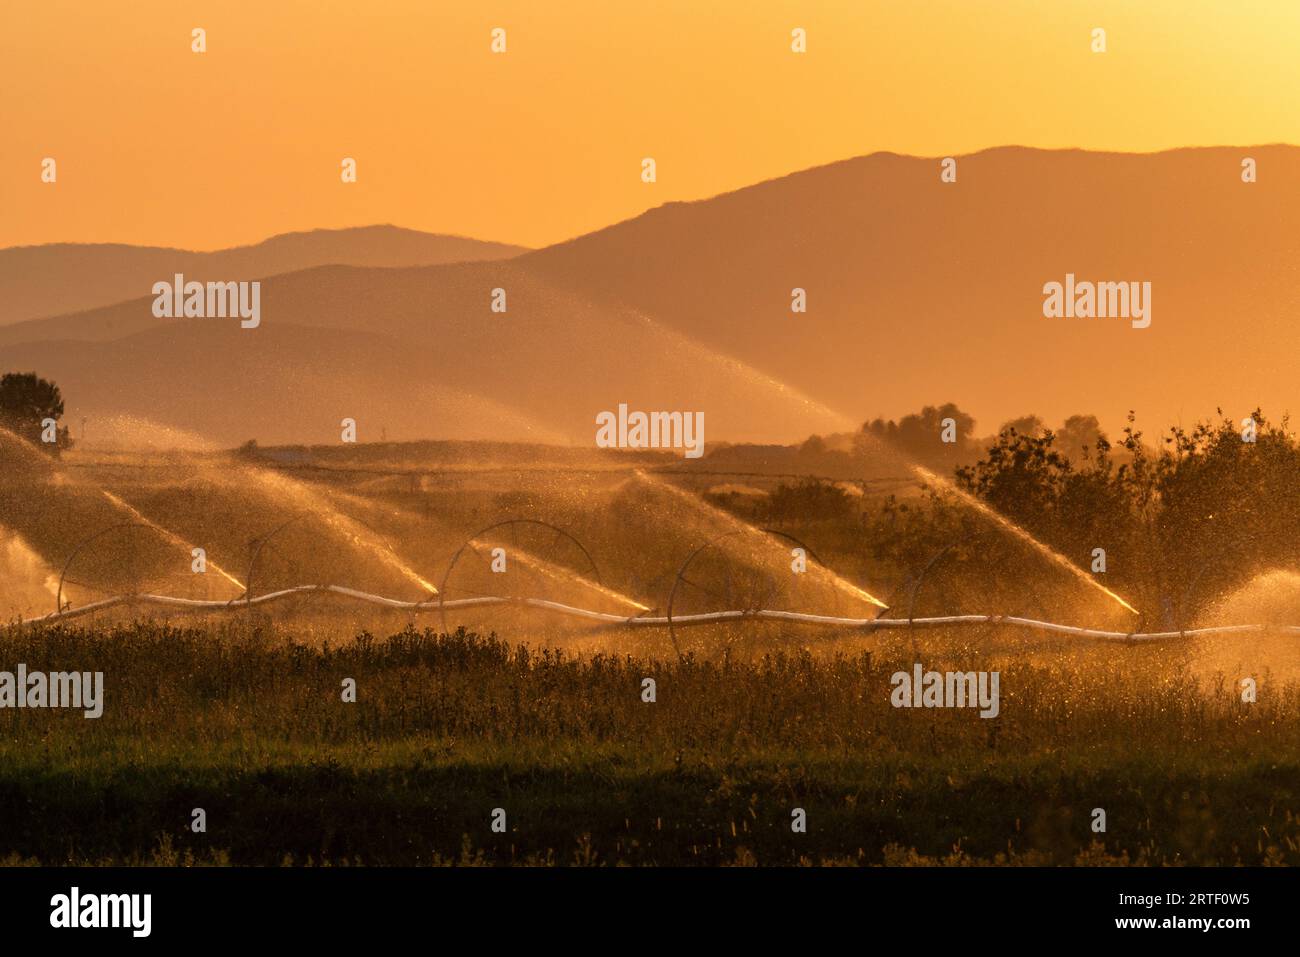 USA, Idaho, Bellevue, Farm irrigation system with mountain landscape in background at sunset Stock Photo